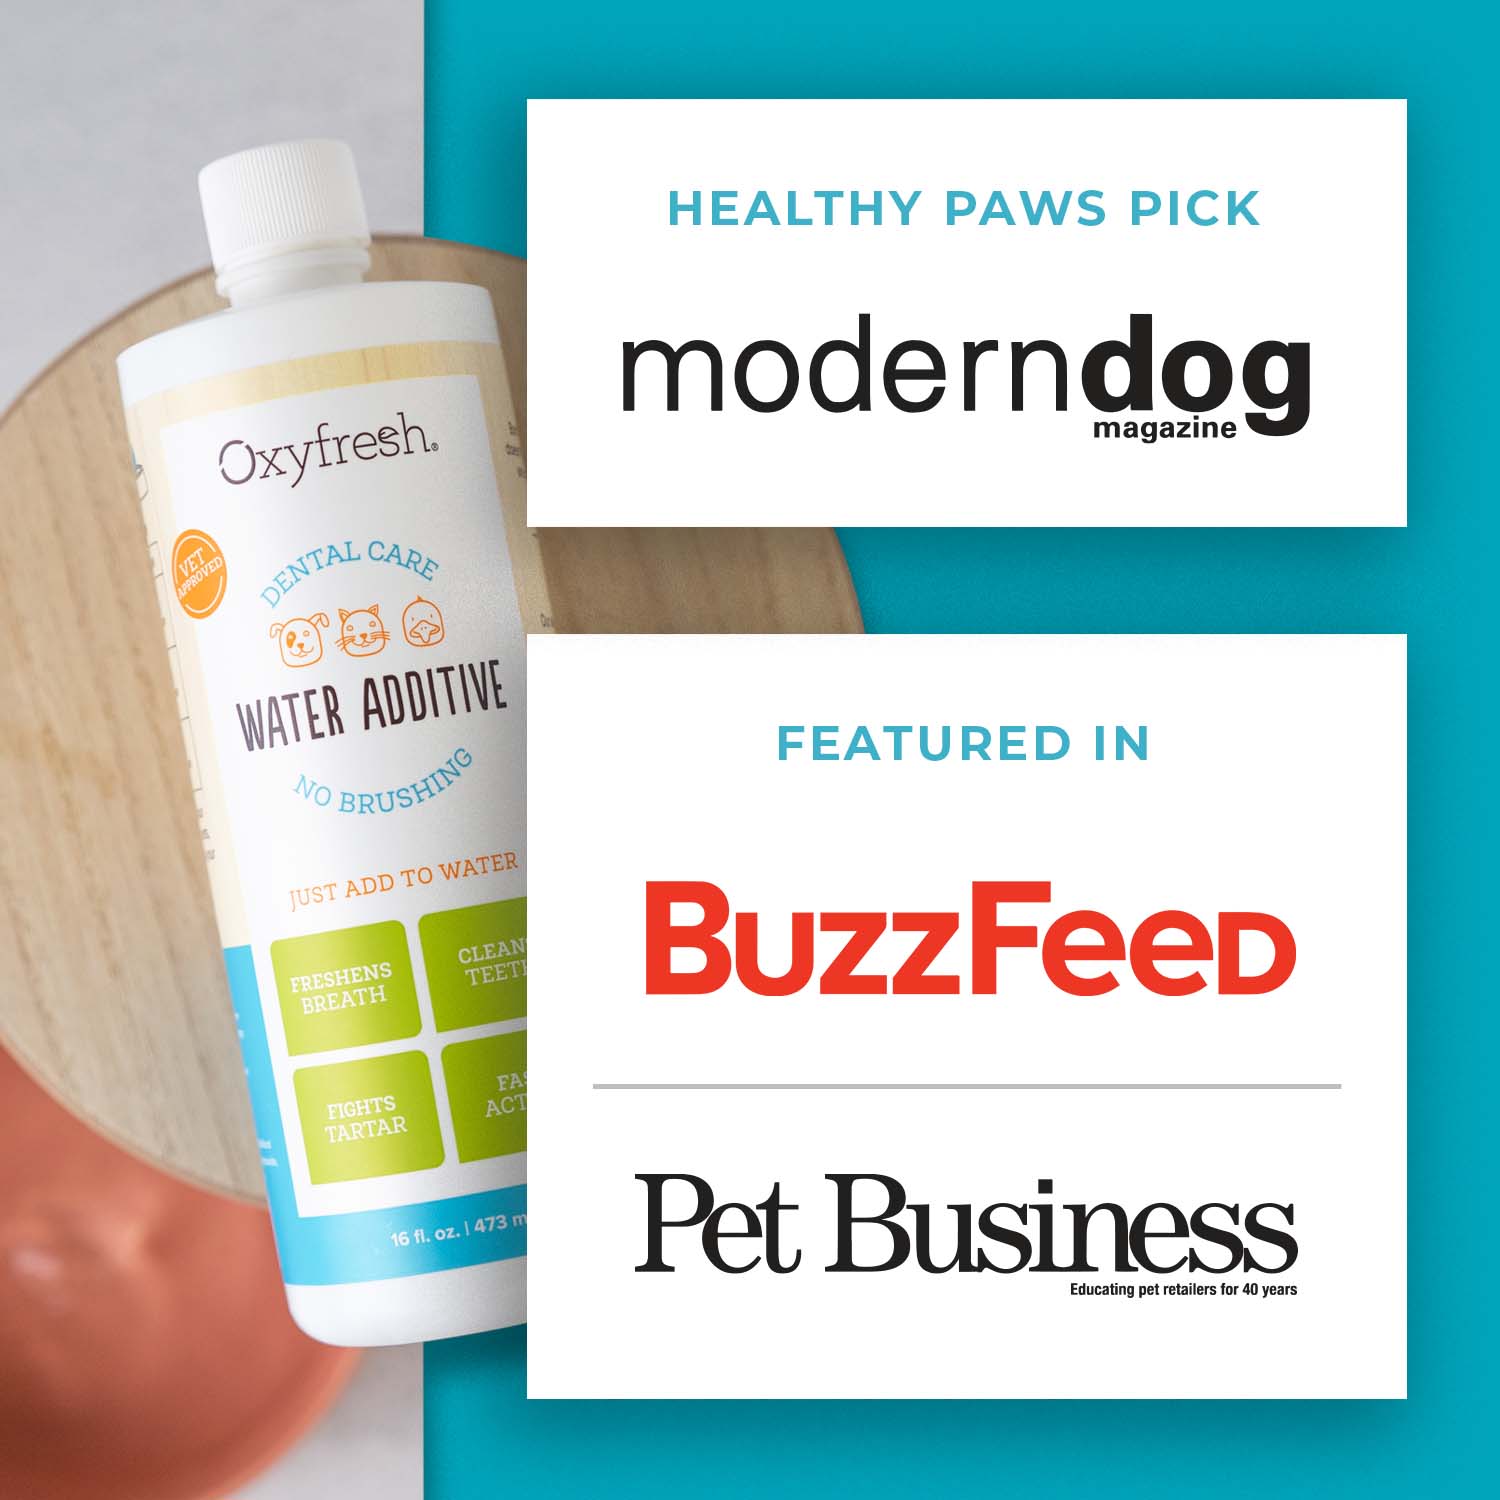 oxyfresh-pet-water-additive-heatlthy-paws-pick-for-moderndog-magazine-and-featured-in-buzzfeed-and-pet-business